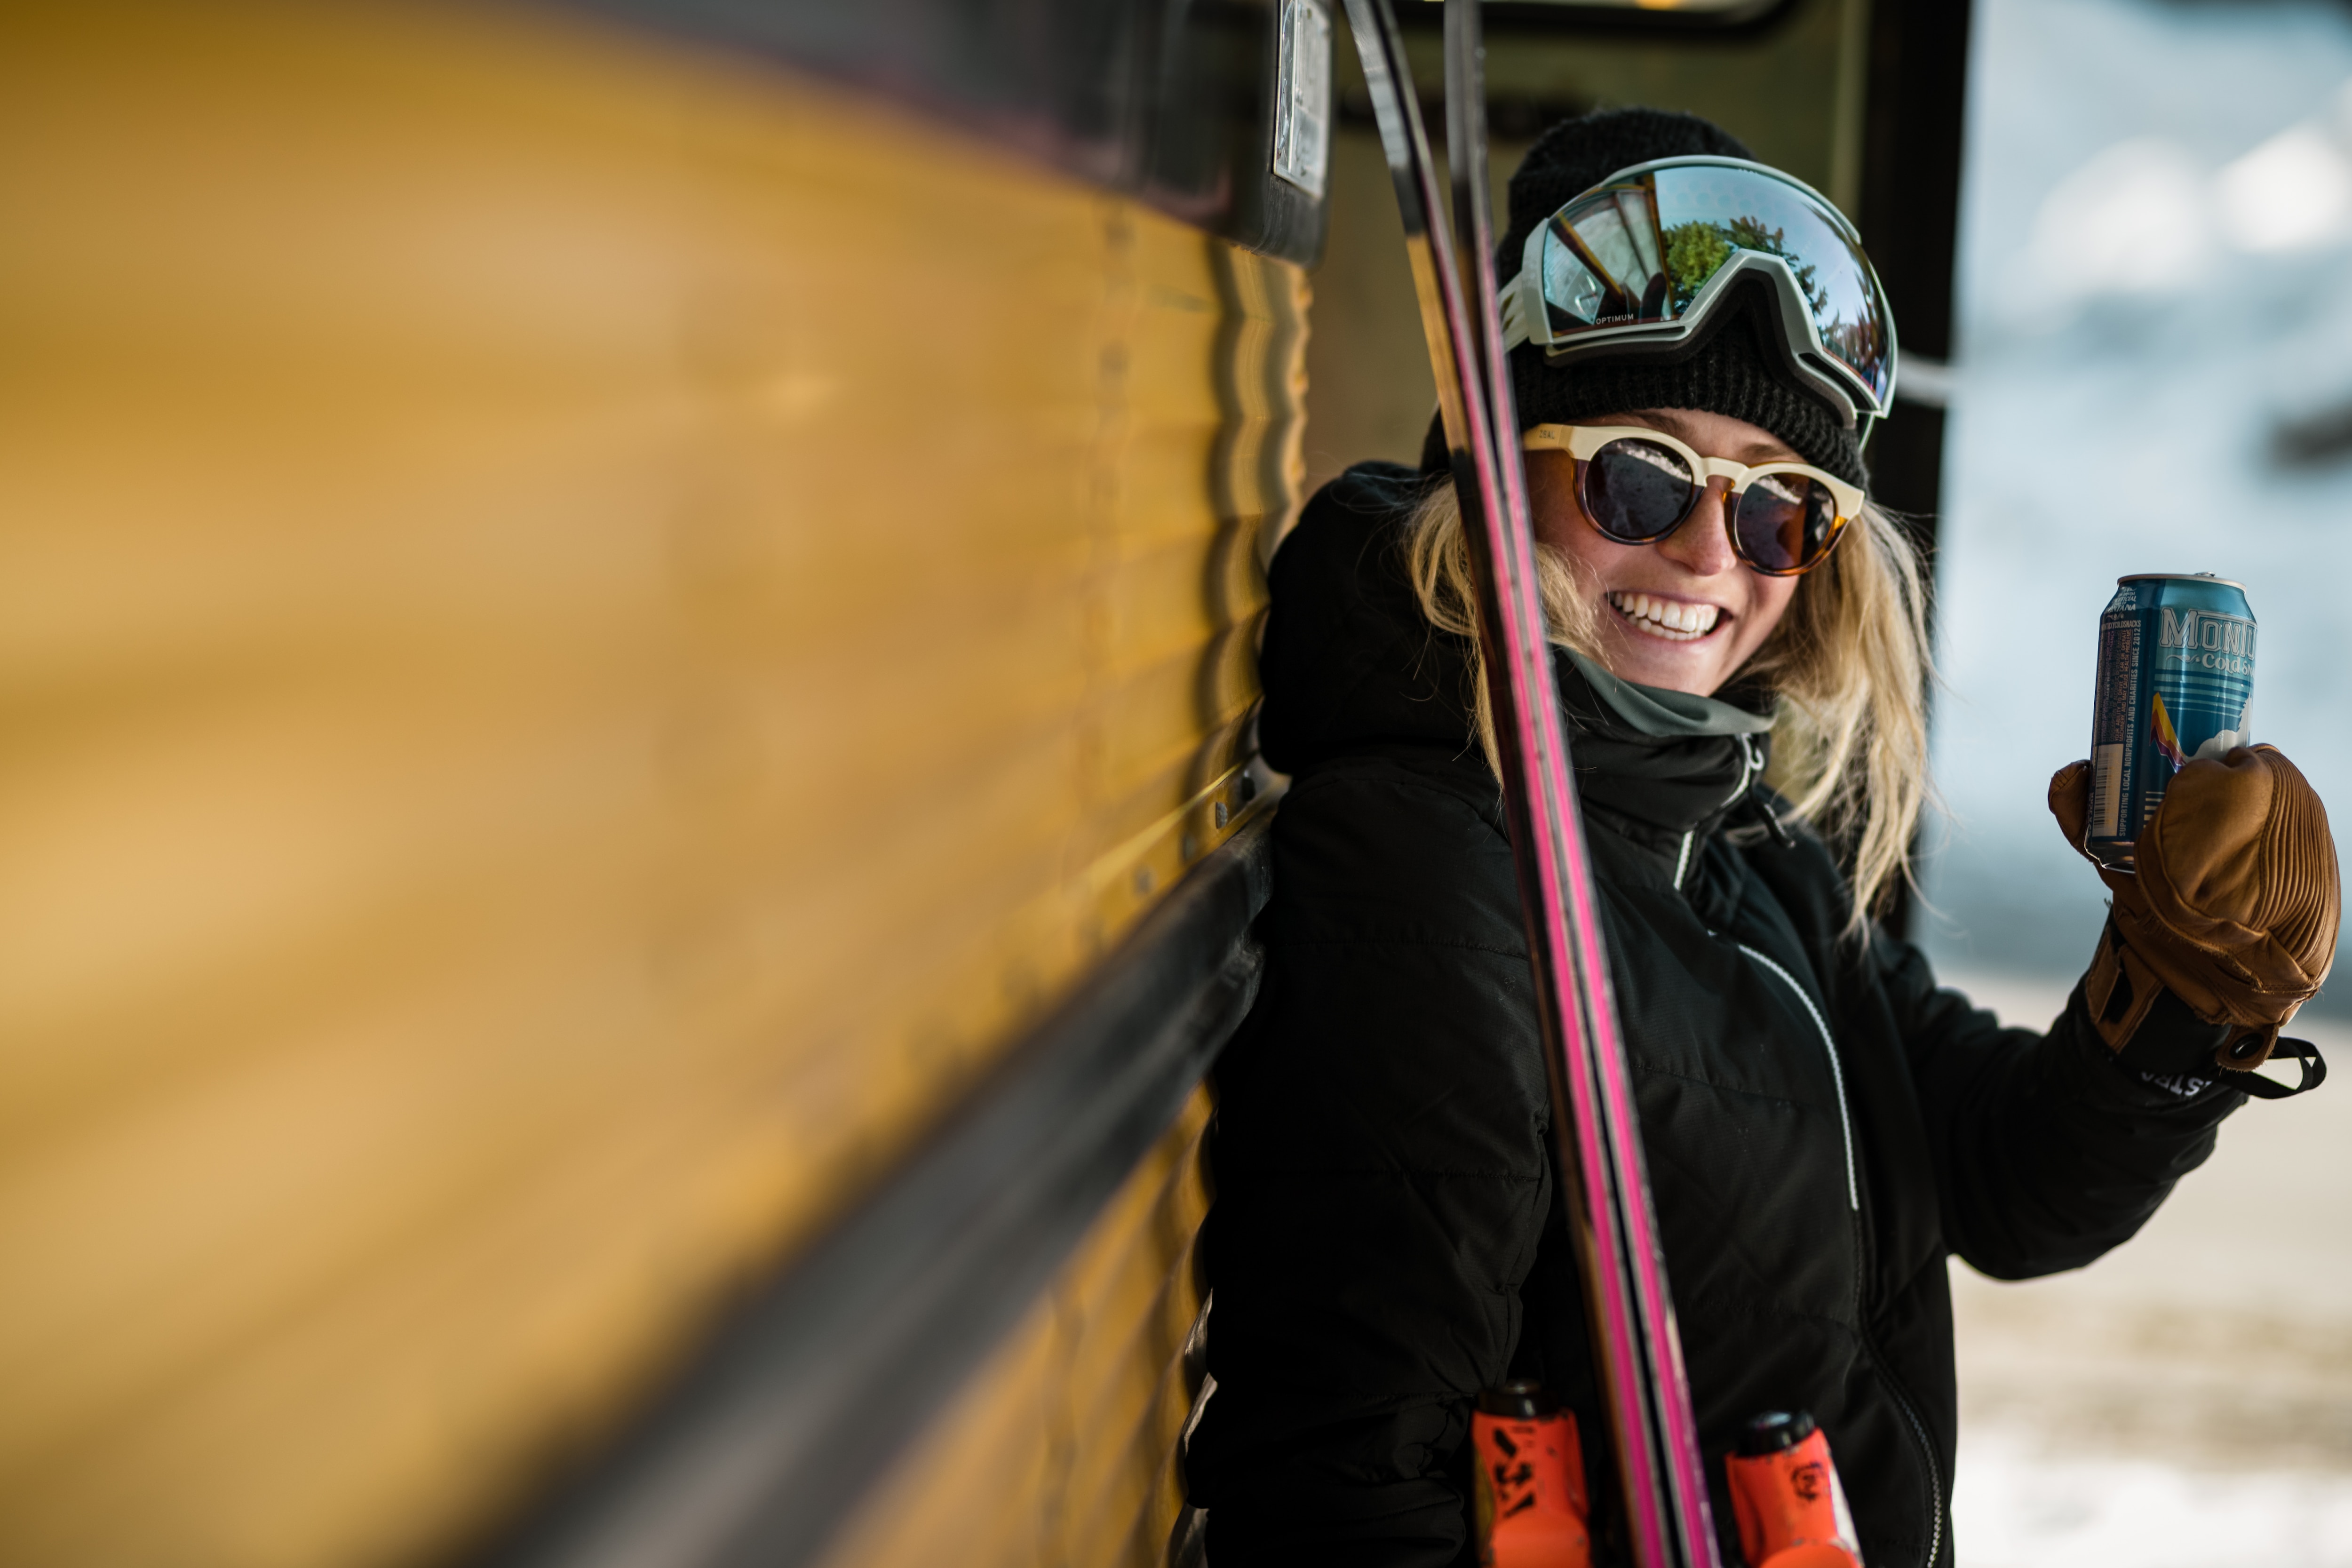 smiling skier leaning against a bus and holding up her drink